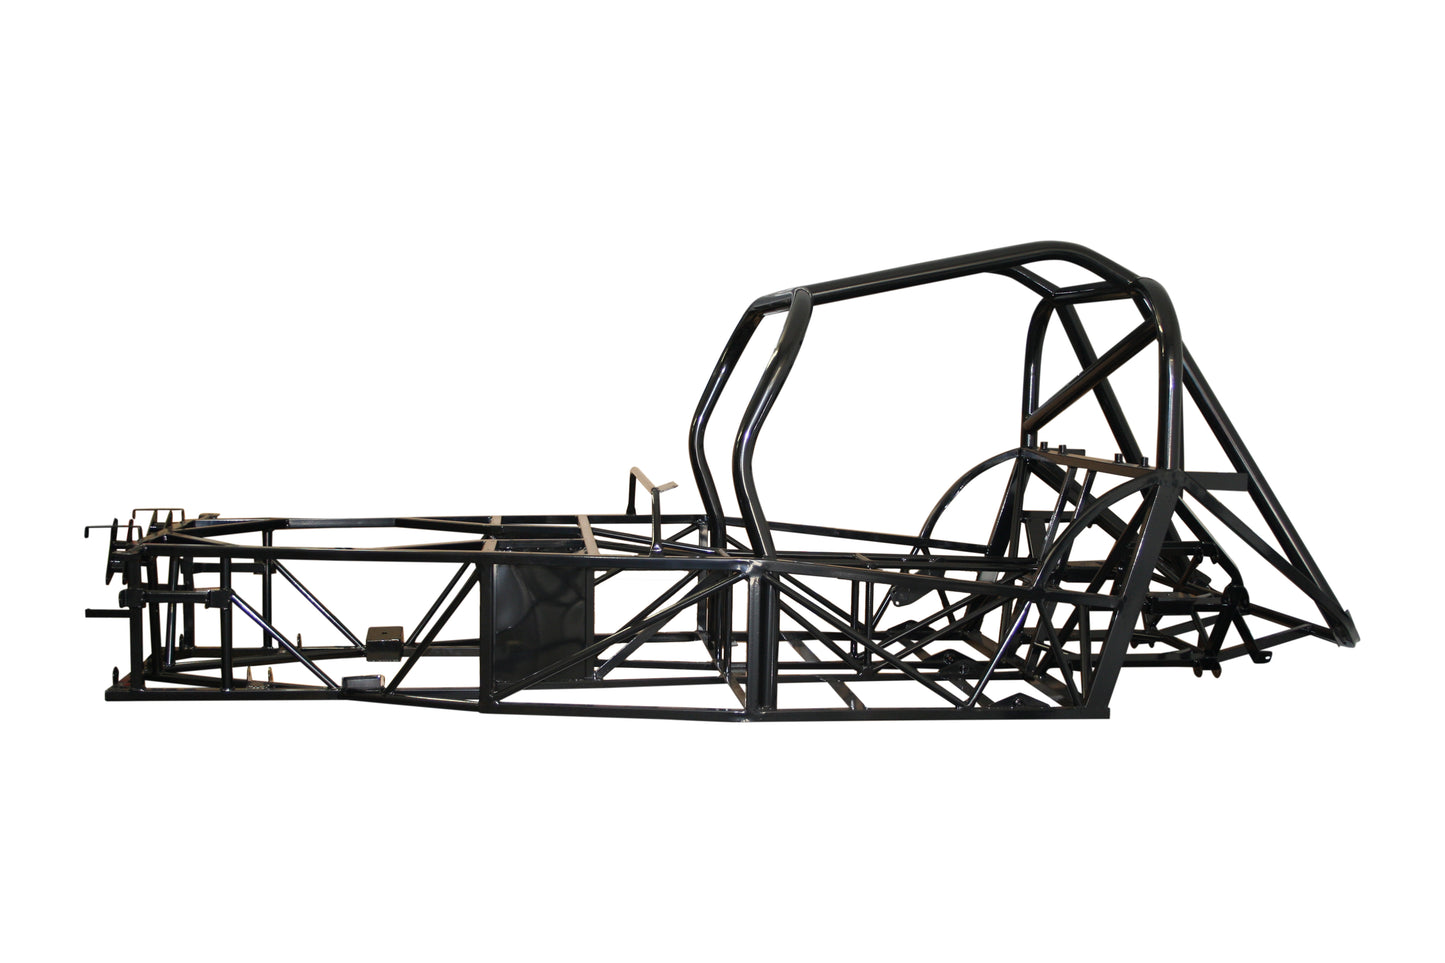 MK Indy RR Chassis